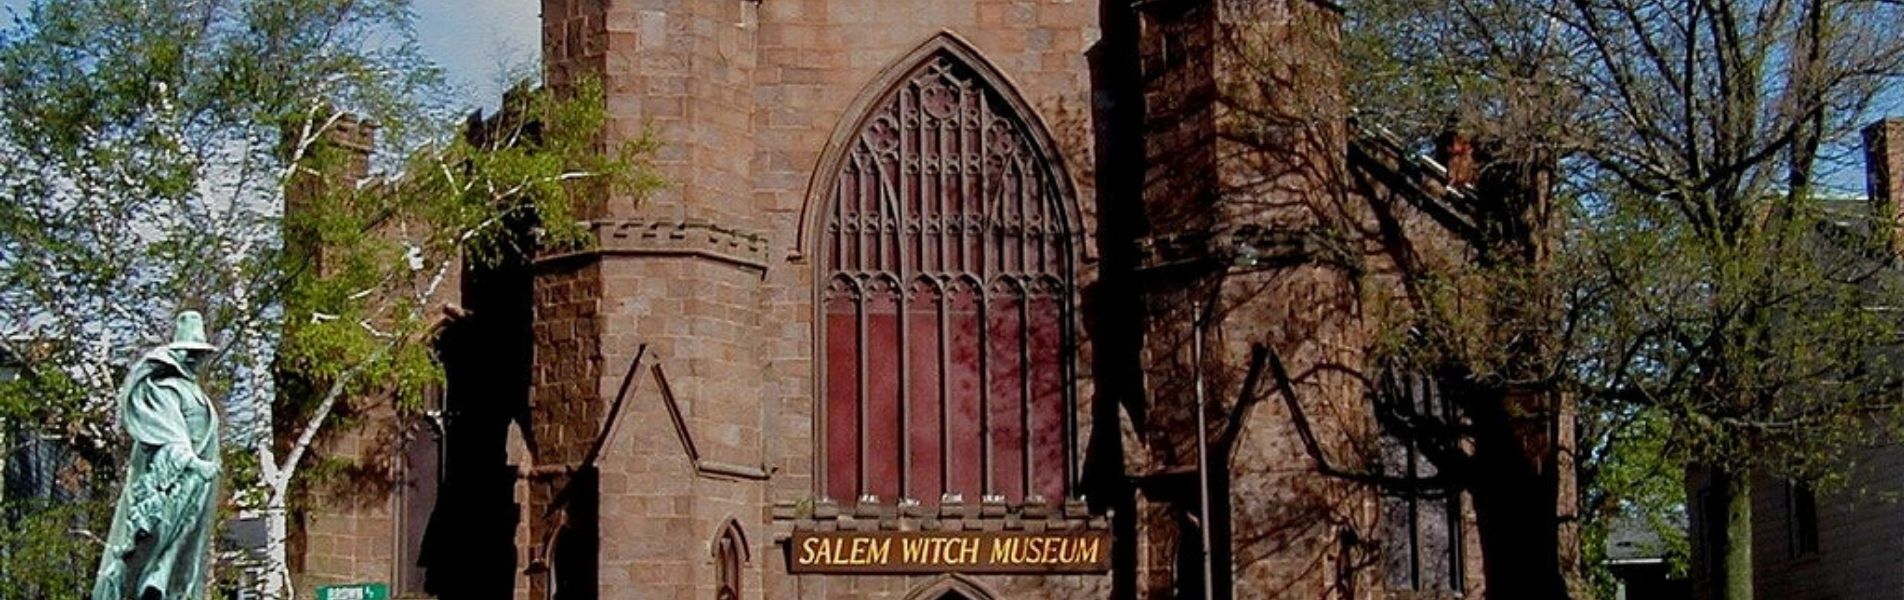 things to do in salem, haunted happenings, destination salem